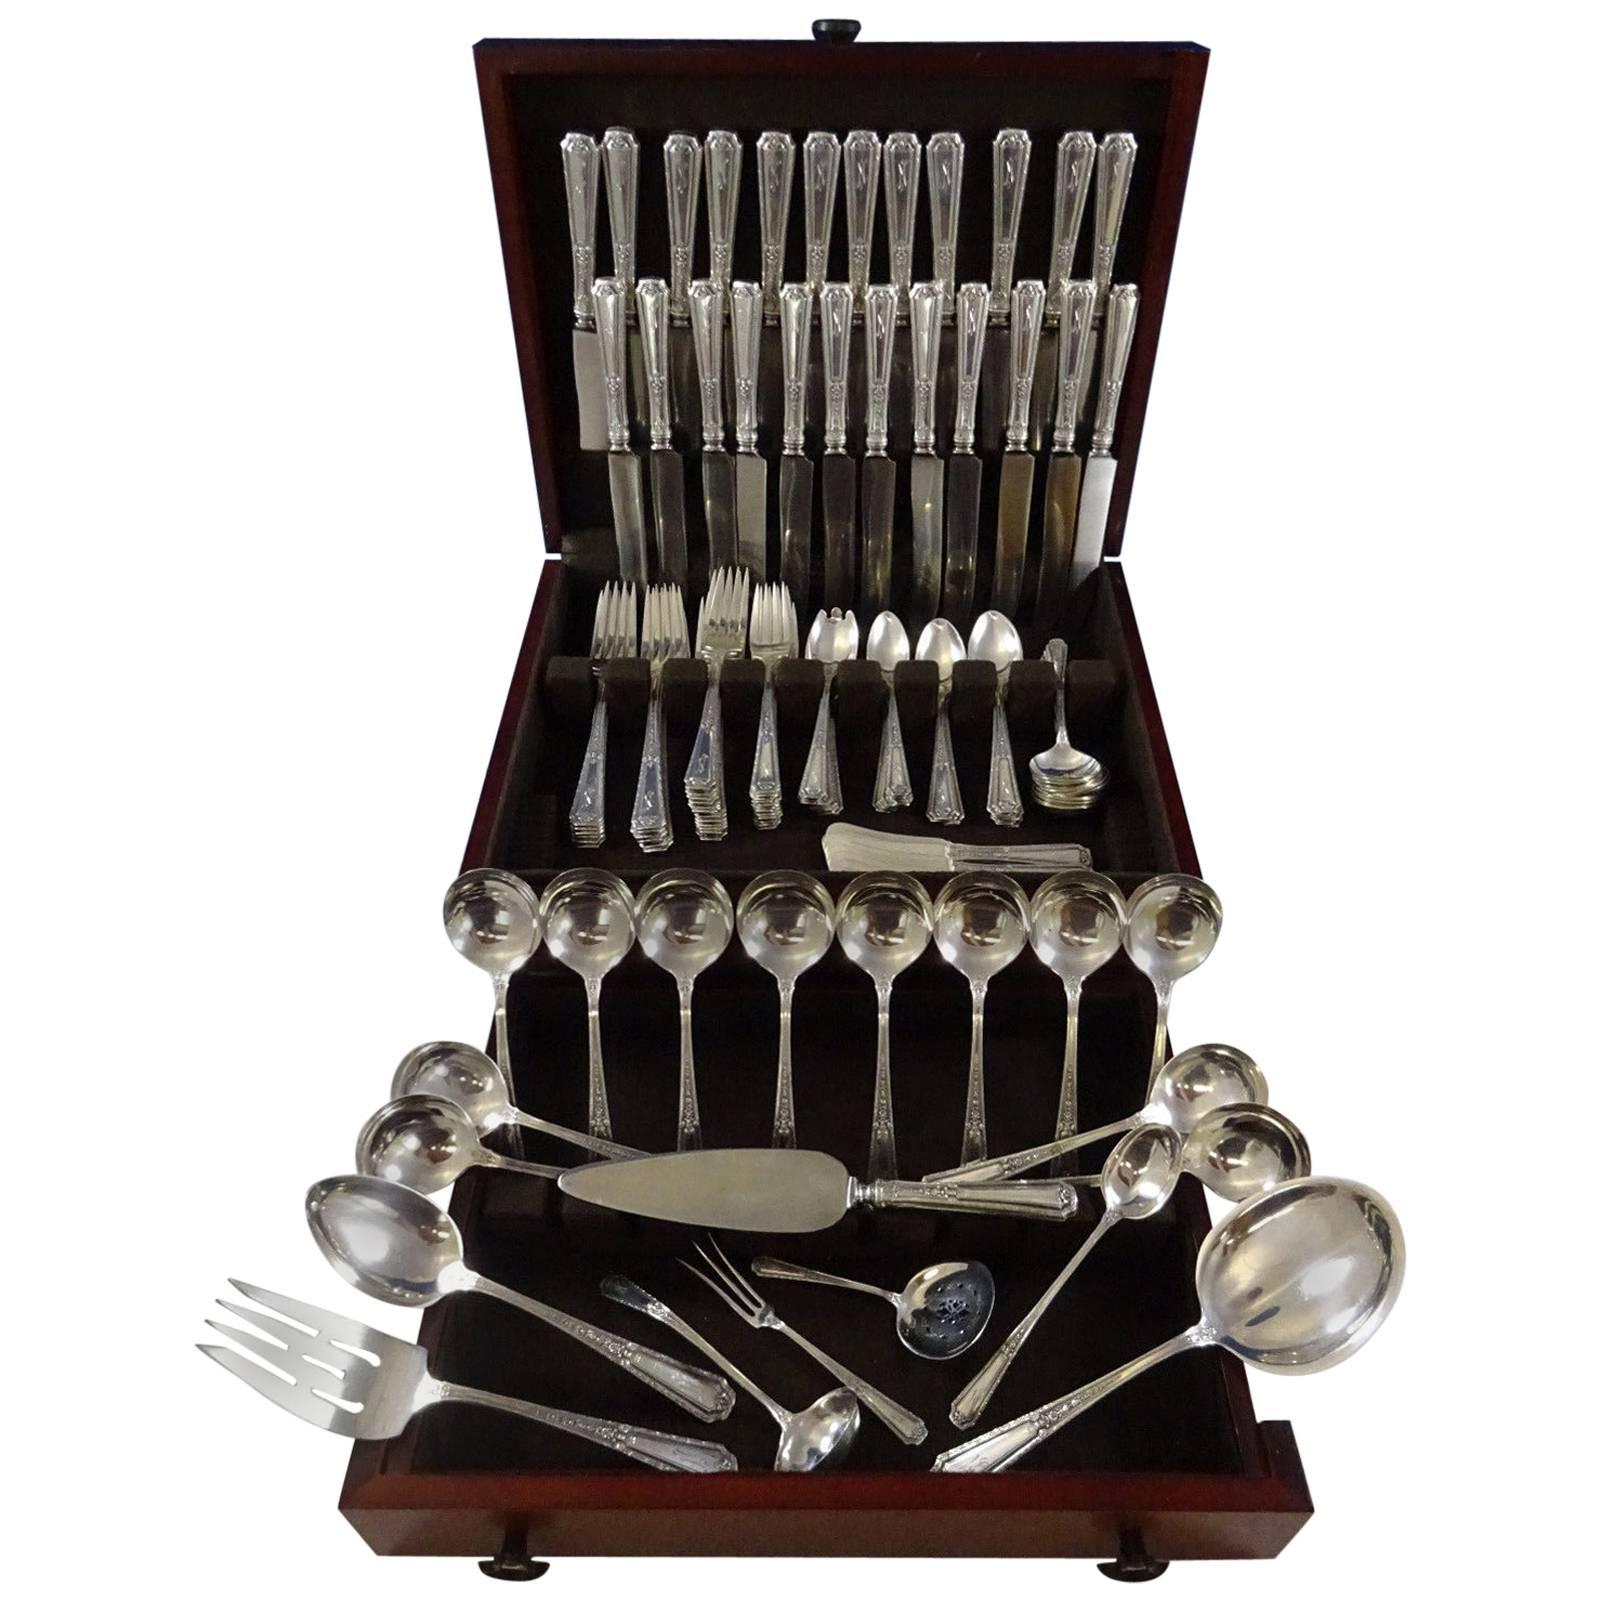 Louis XIV by Towle Sterling silver dinner and luncheon flatware set of 142 pieces with "M" monogram. This set includes: 12 dinner size knives, 9 1/2", 12 dinner size forks, 7 7/8", 12 luncheon knives, 8 5/8", 12 luncheon